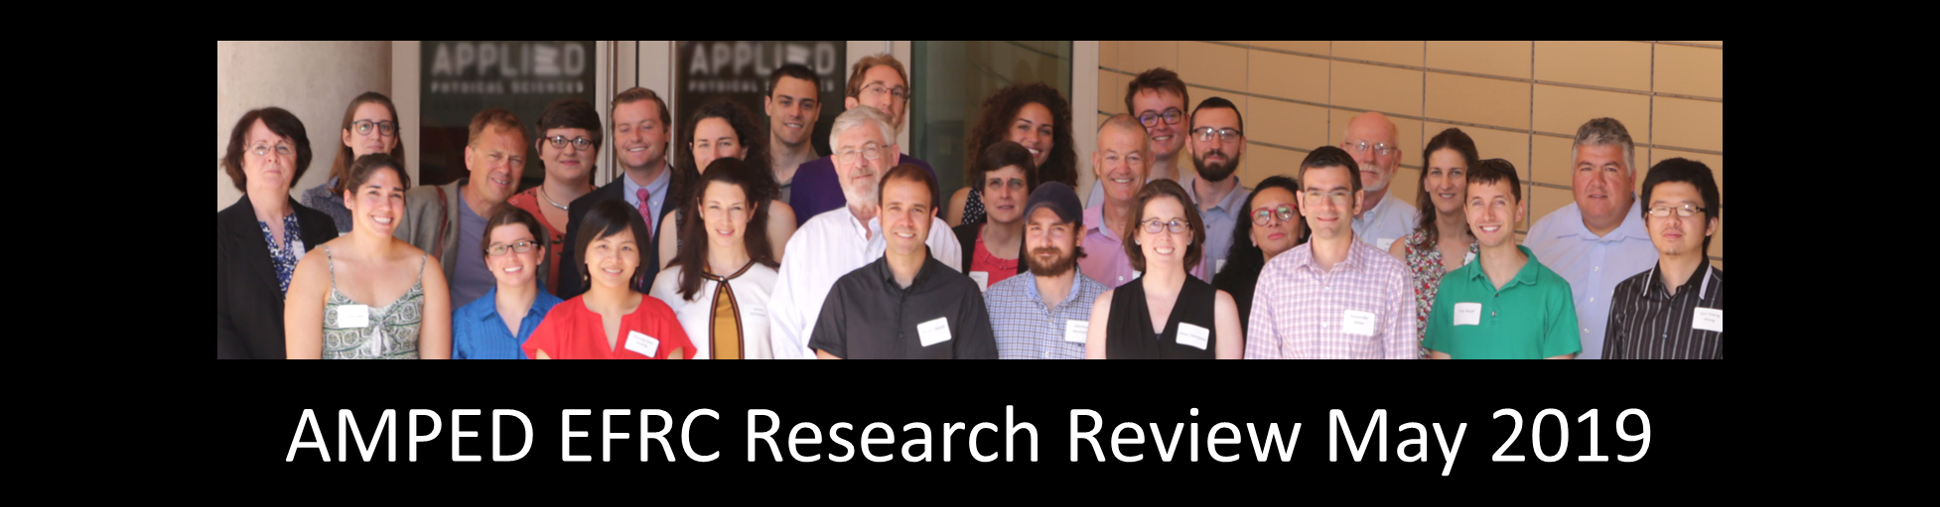 2019 EFRC Review 11